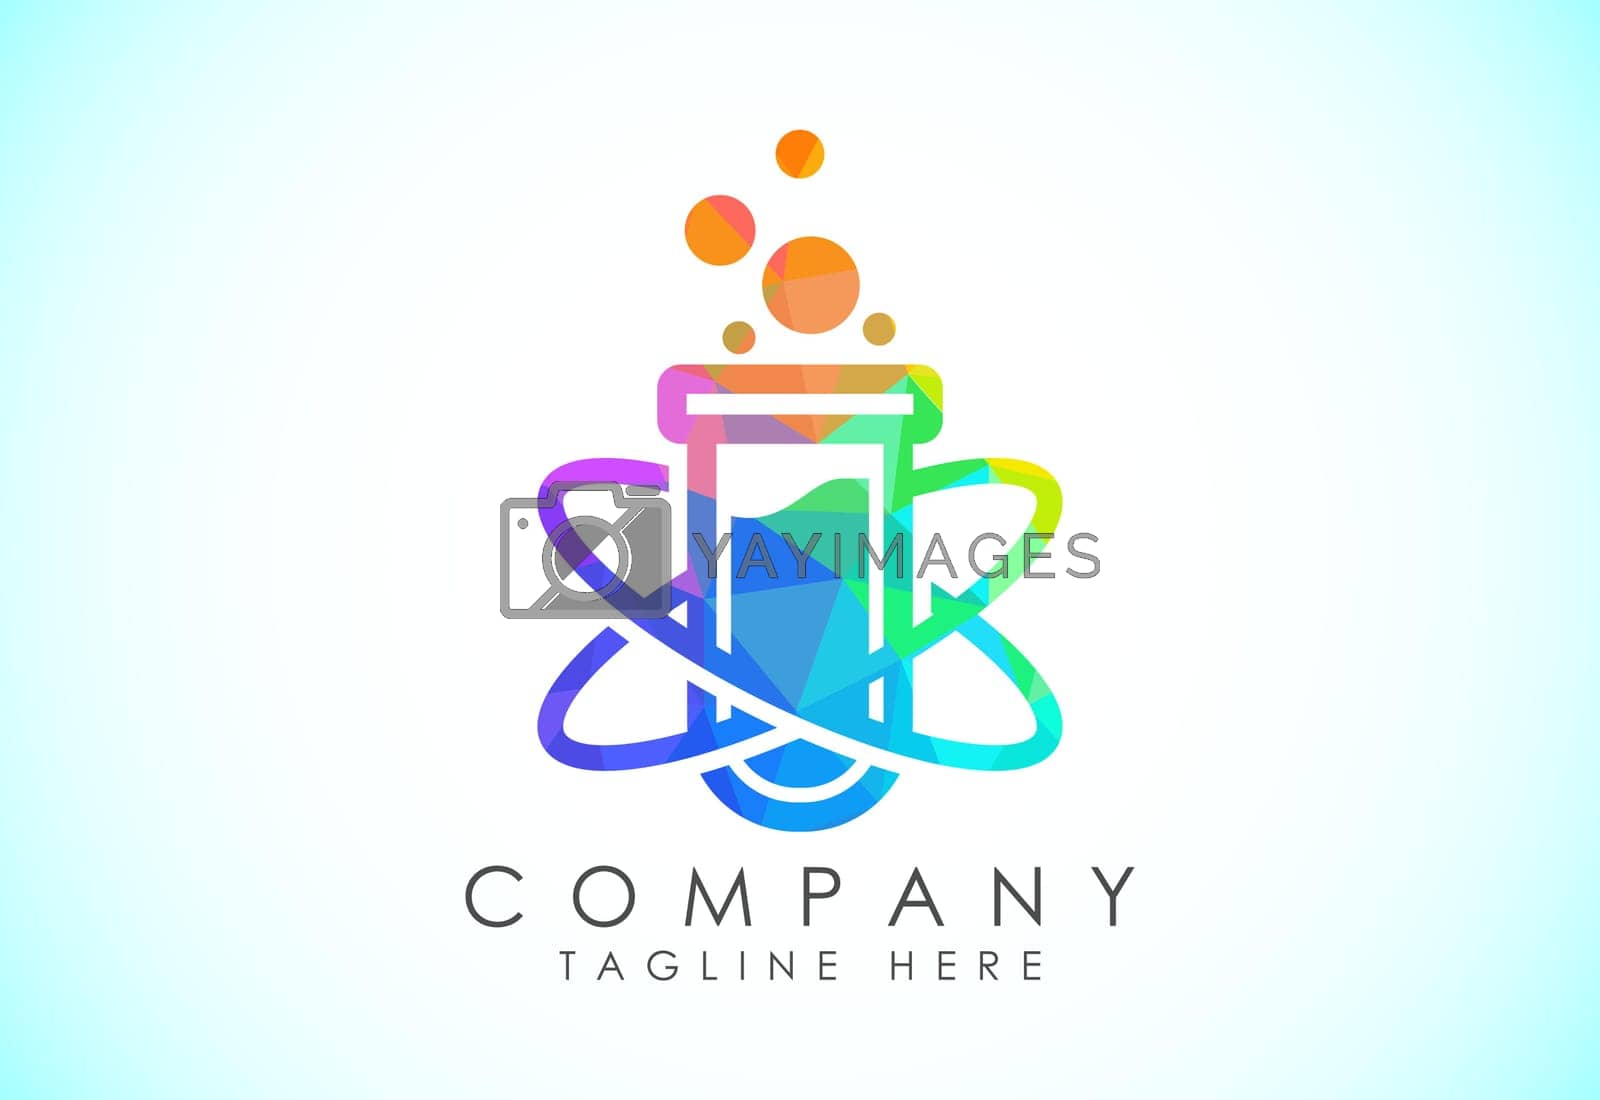 Royalty free image of Polygonal lab logo design vector template, Low poly lab logo science vector illustration  by busrat